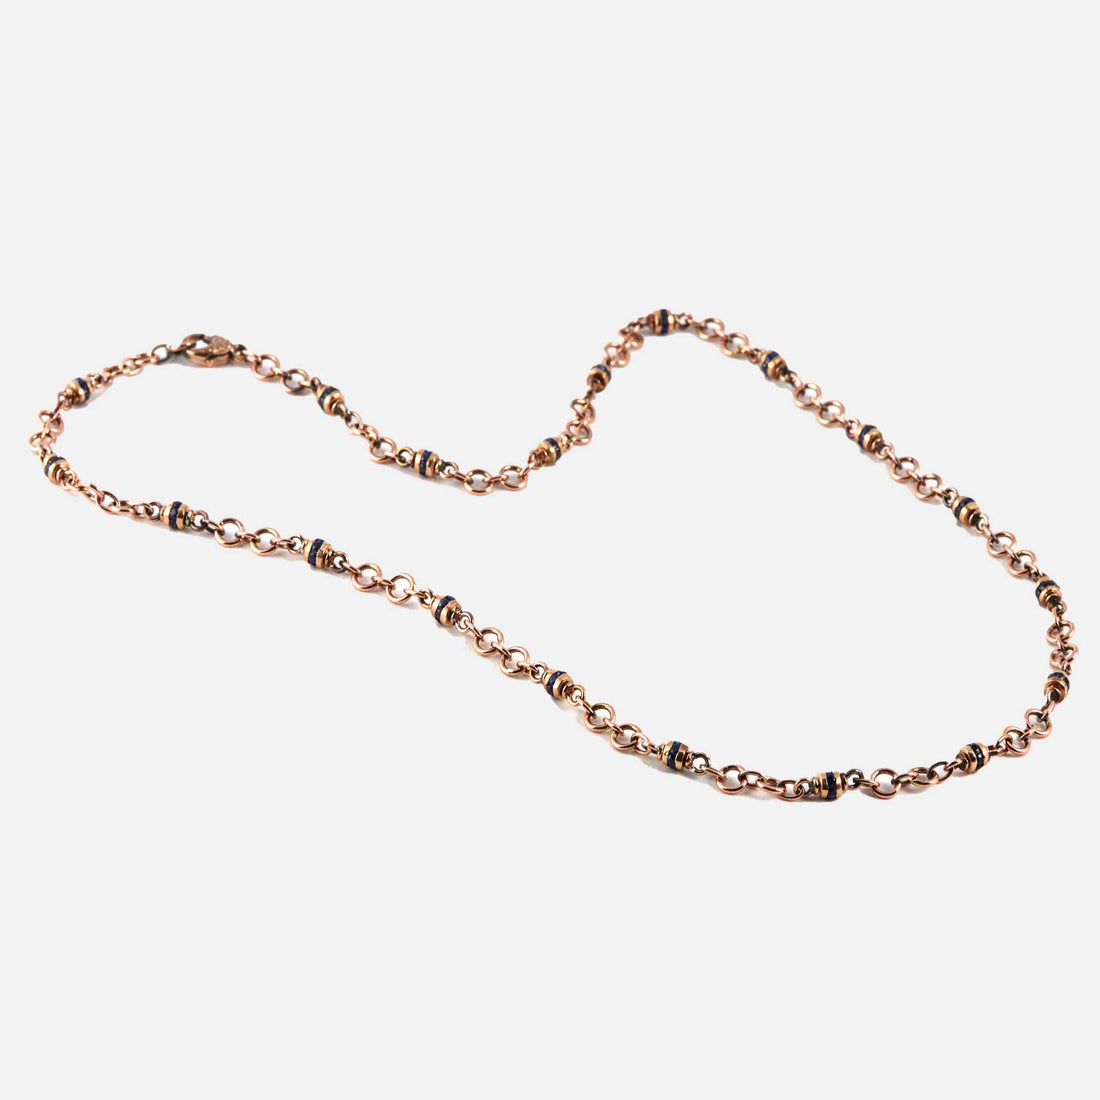 Sapphire bead and rose gold link chain